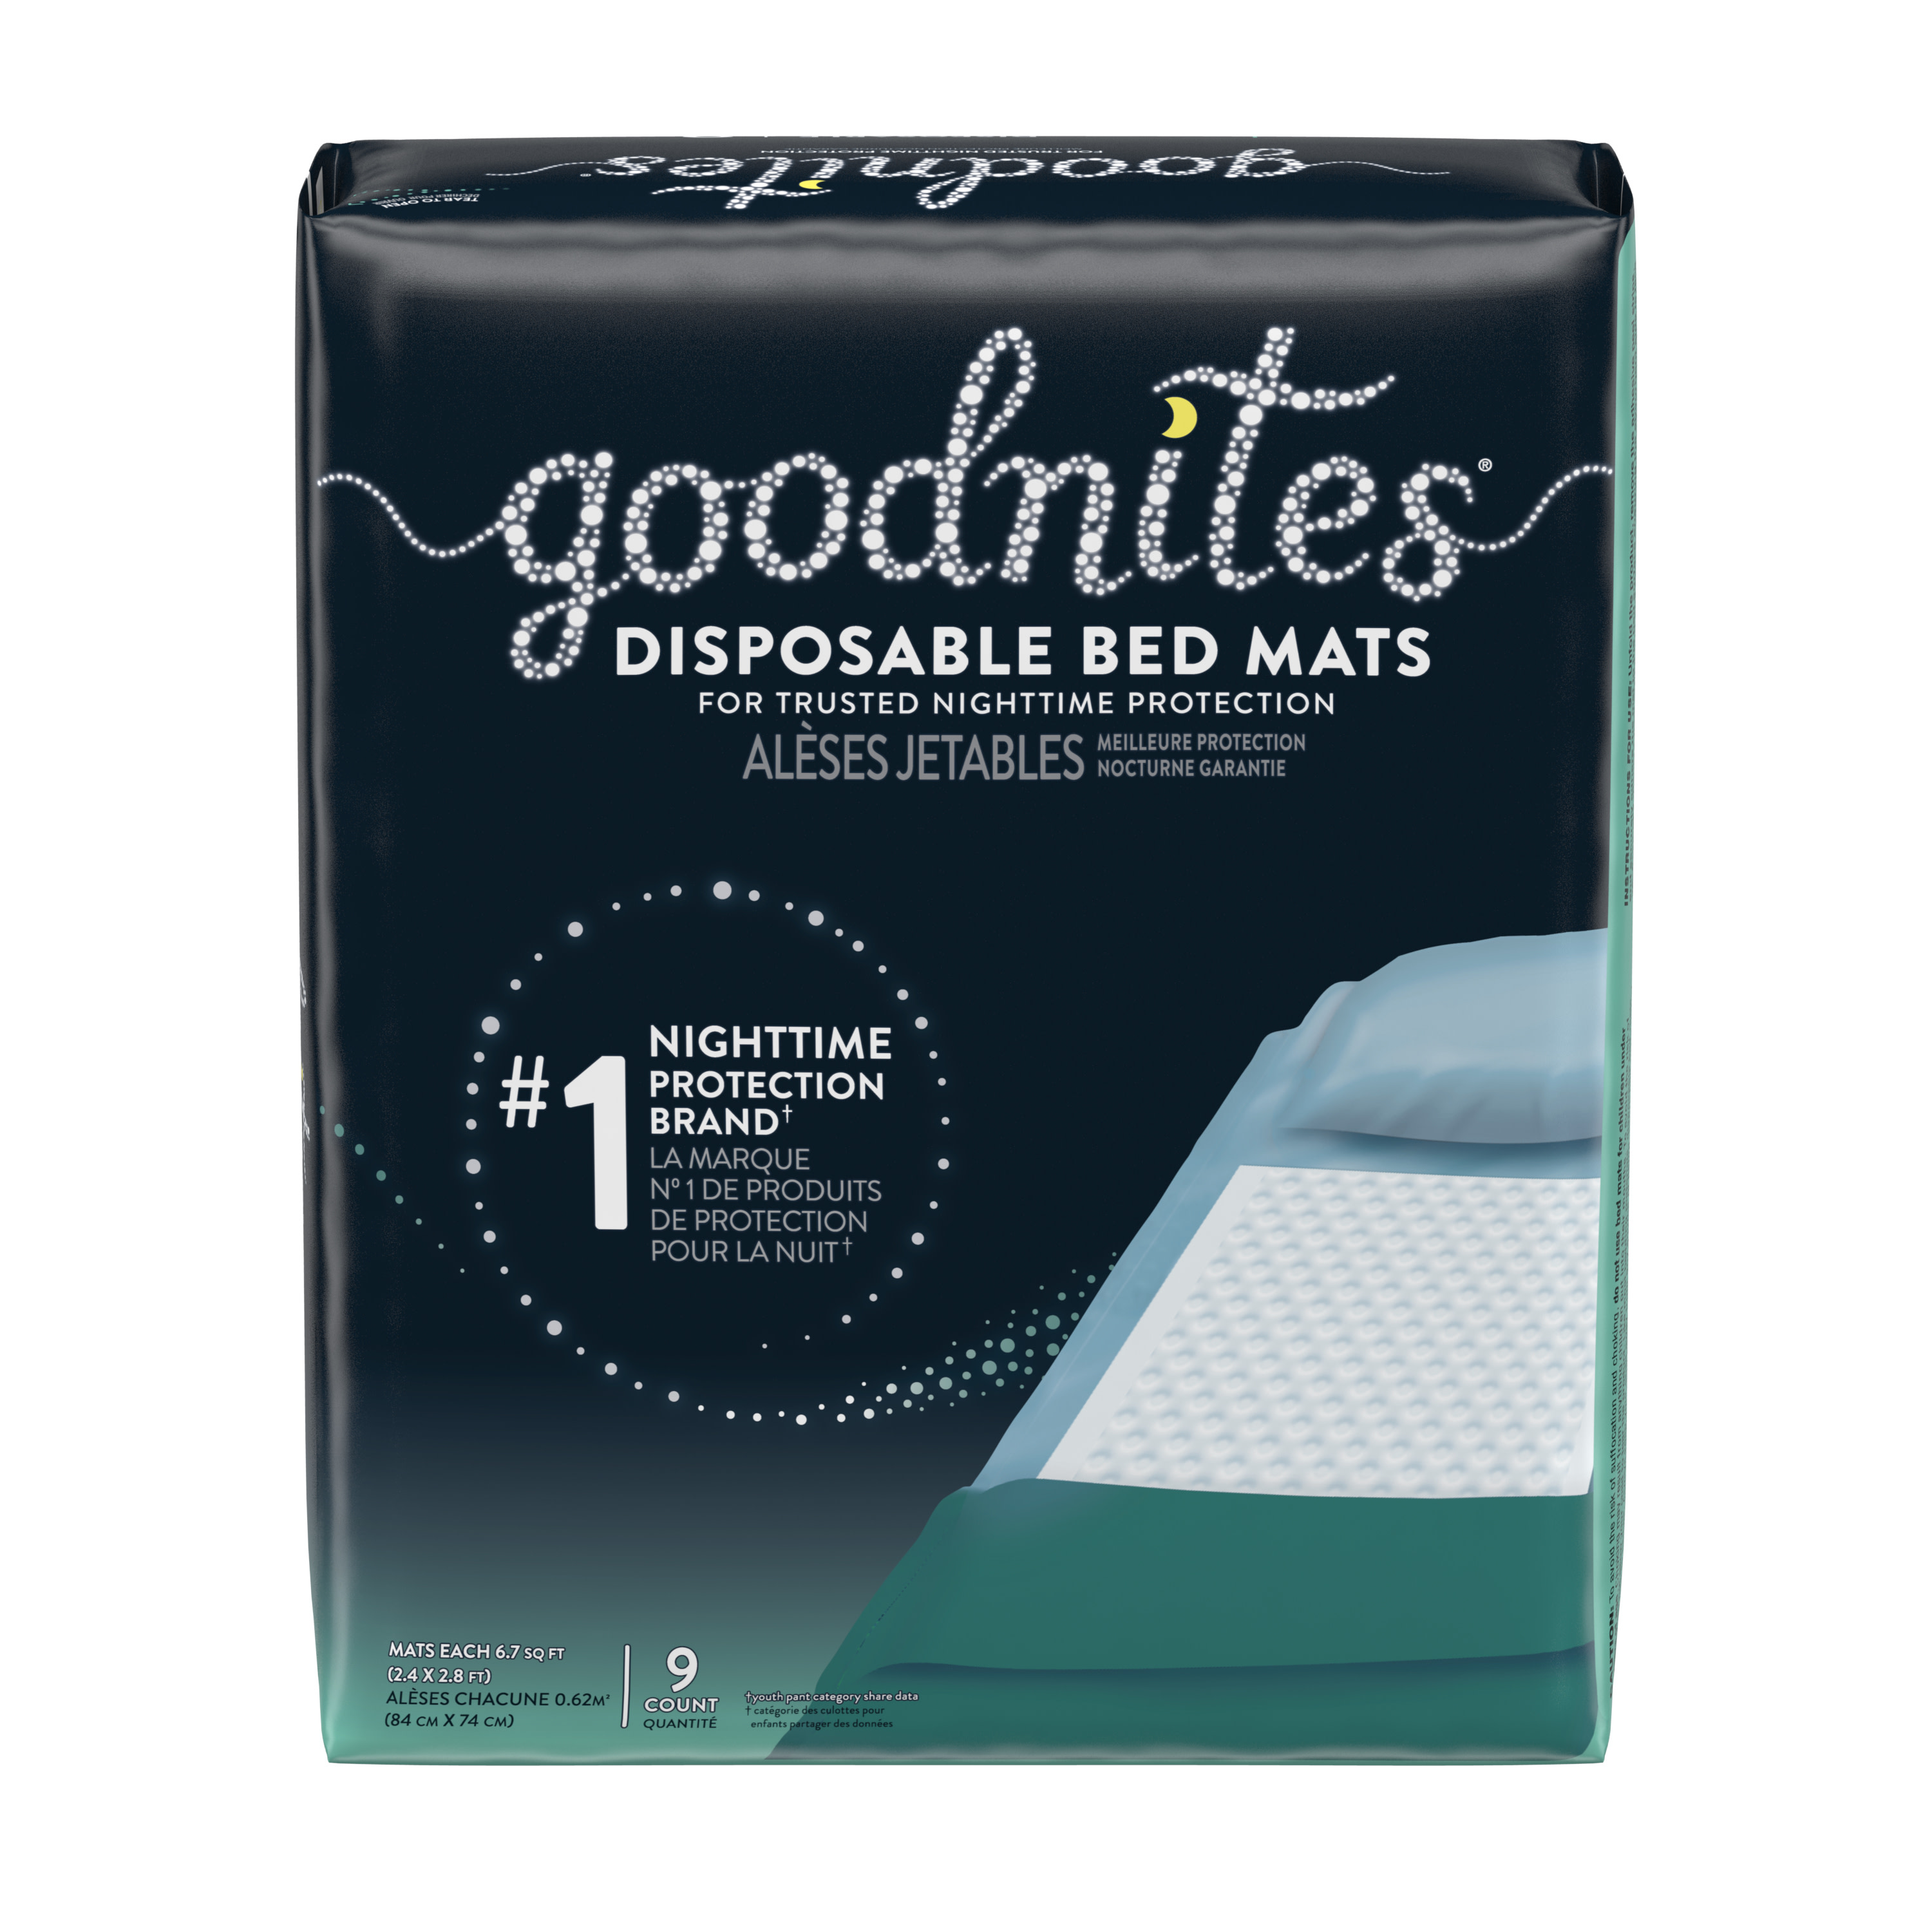 Goodnites Disposable Bed Pads for Bedwetting, 9 Ct (Select for More Options) - image 9 of 9